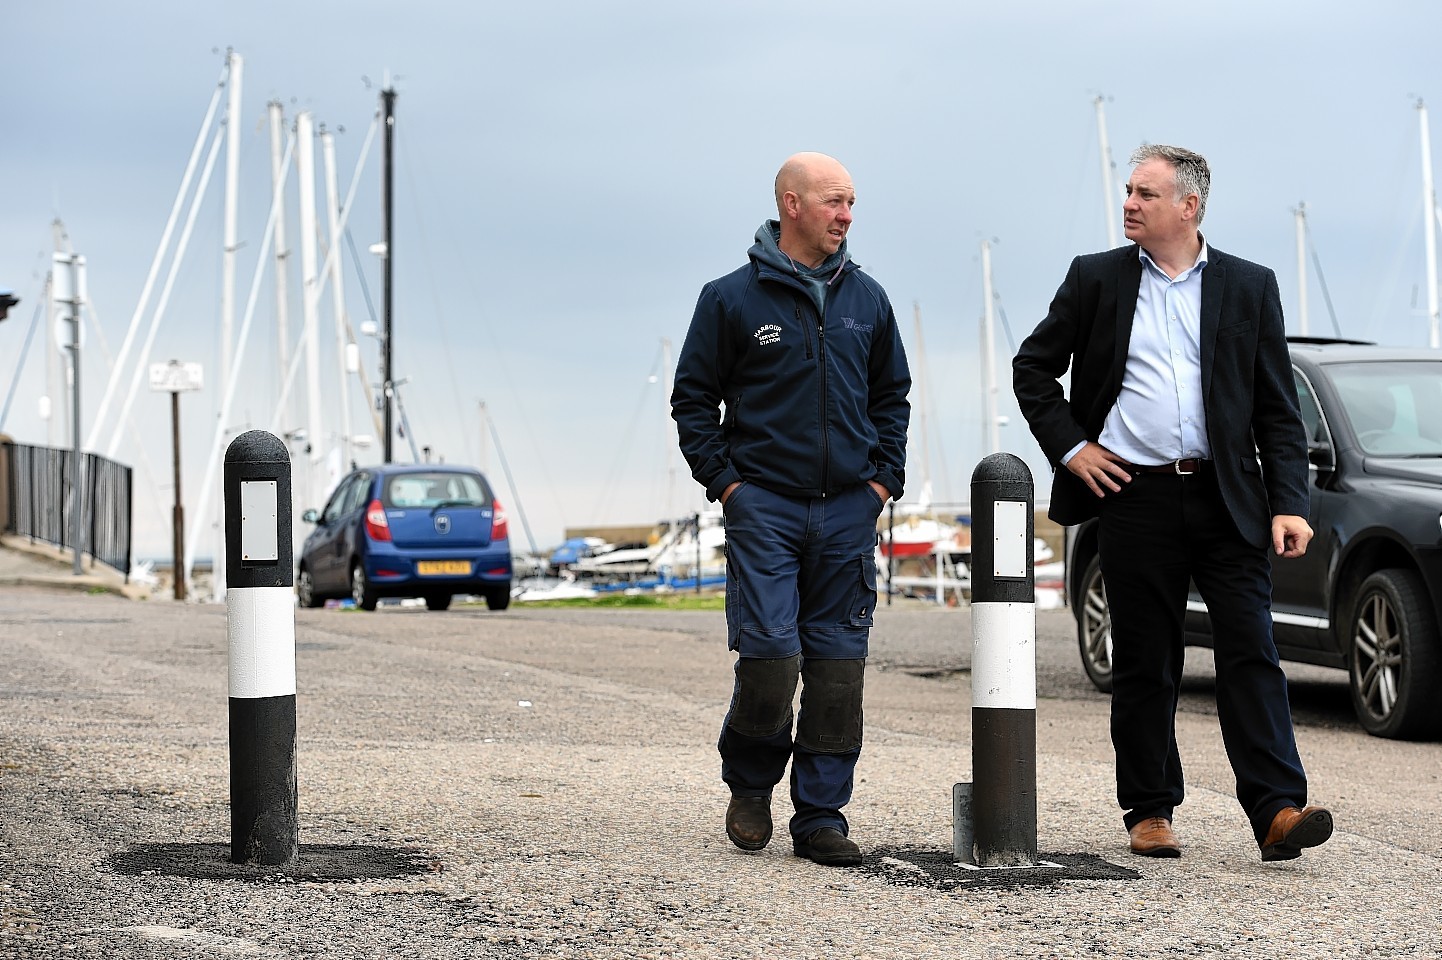 Lossiemouth garage owner, John Thomson, left, with Richard Lochhead, MSP, Picture by Gordon Lennox